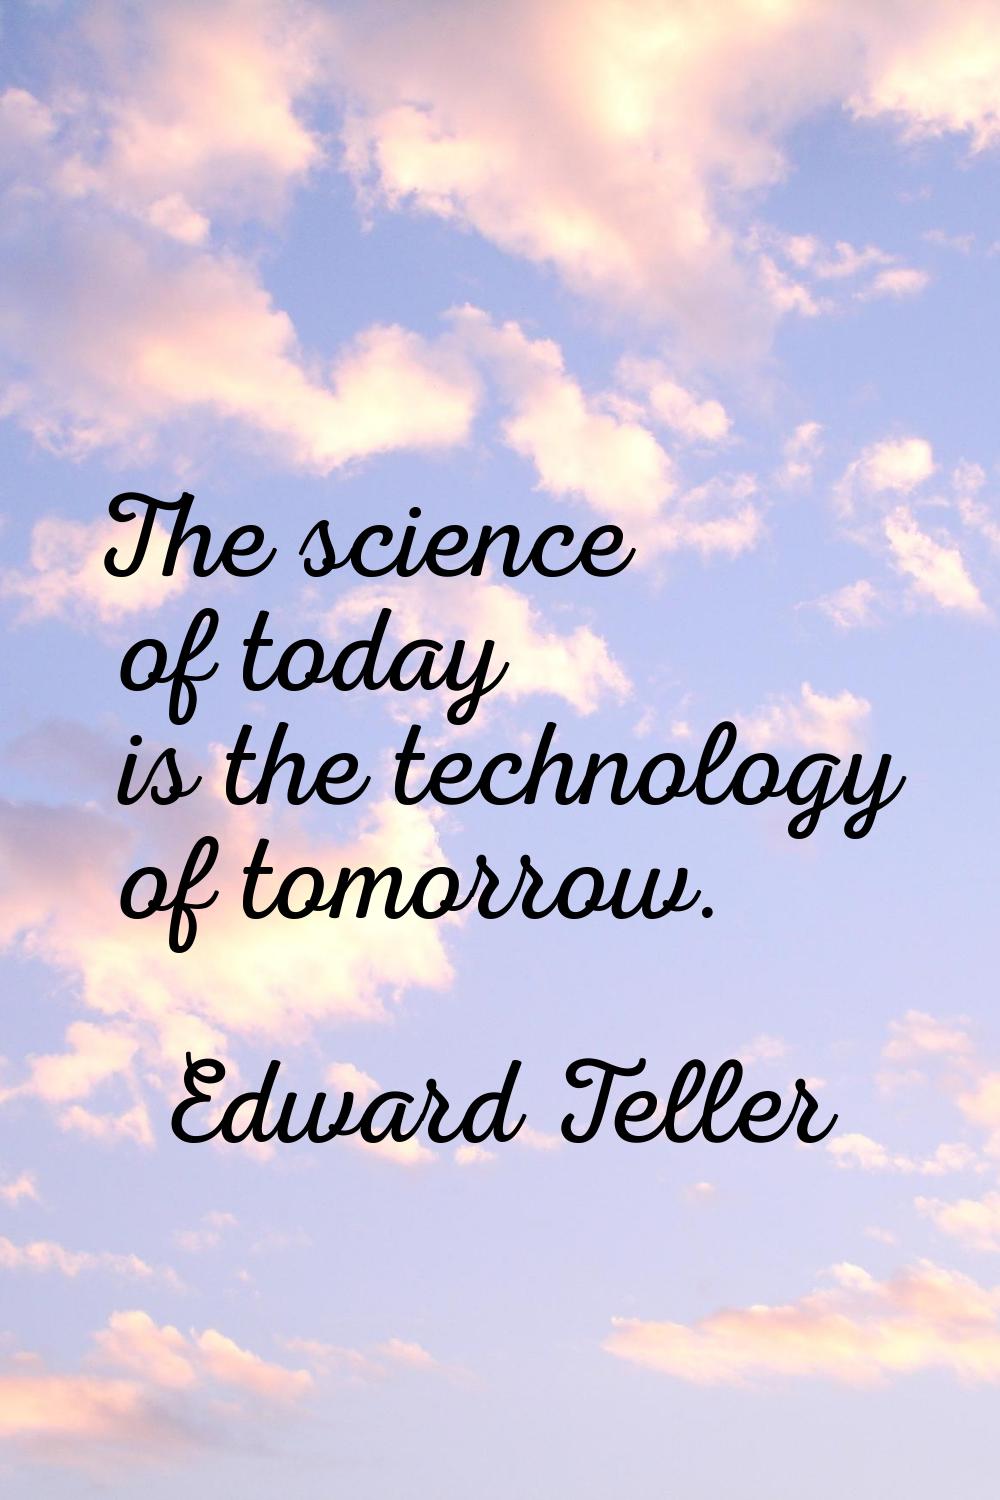 The science of today is the technology of tomorrow.